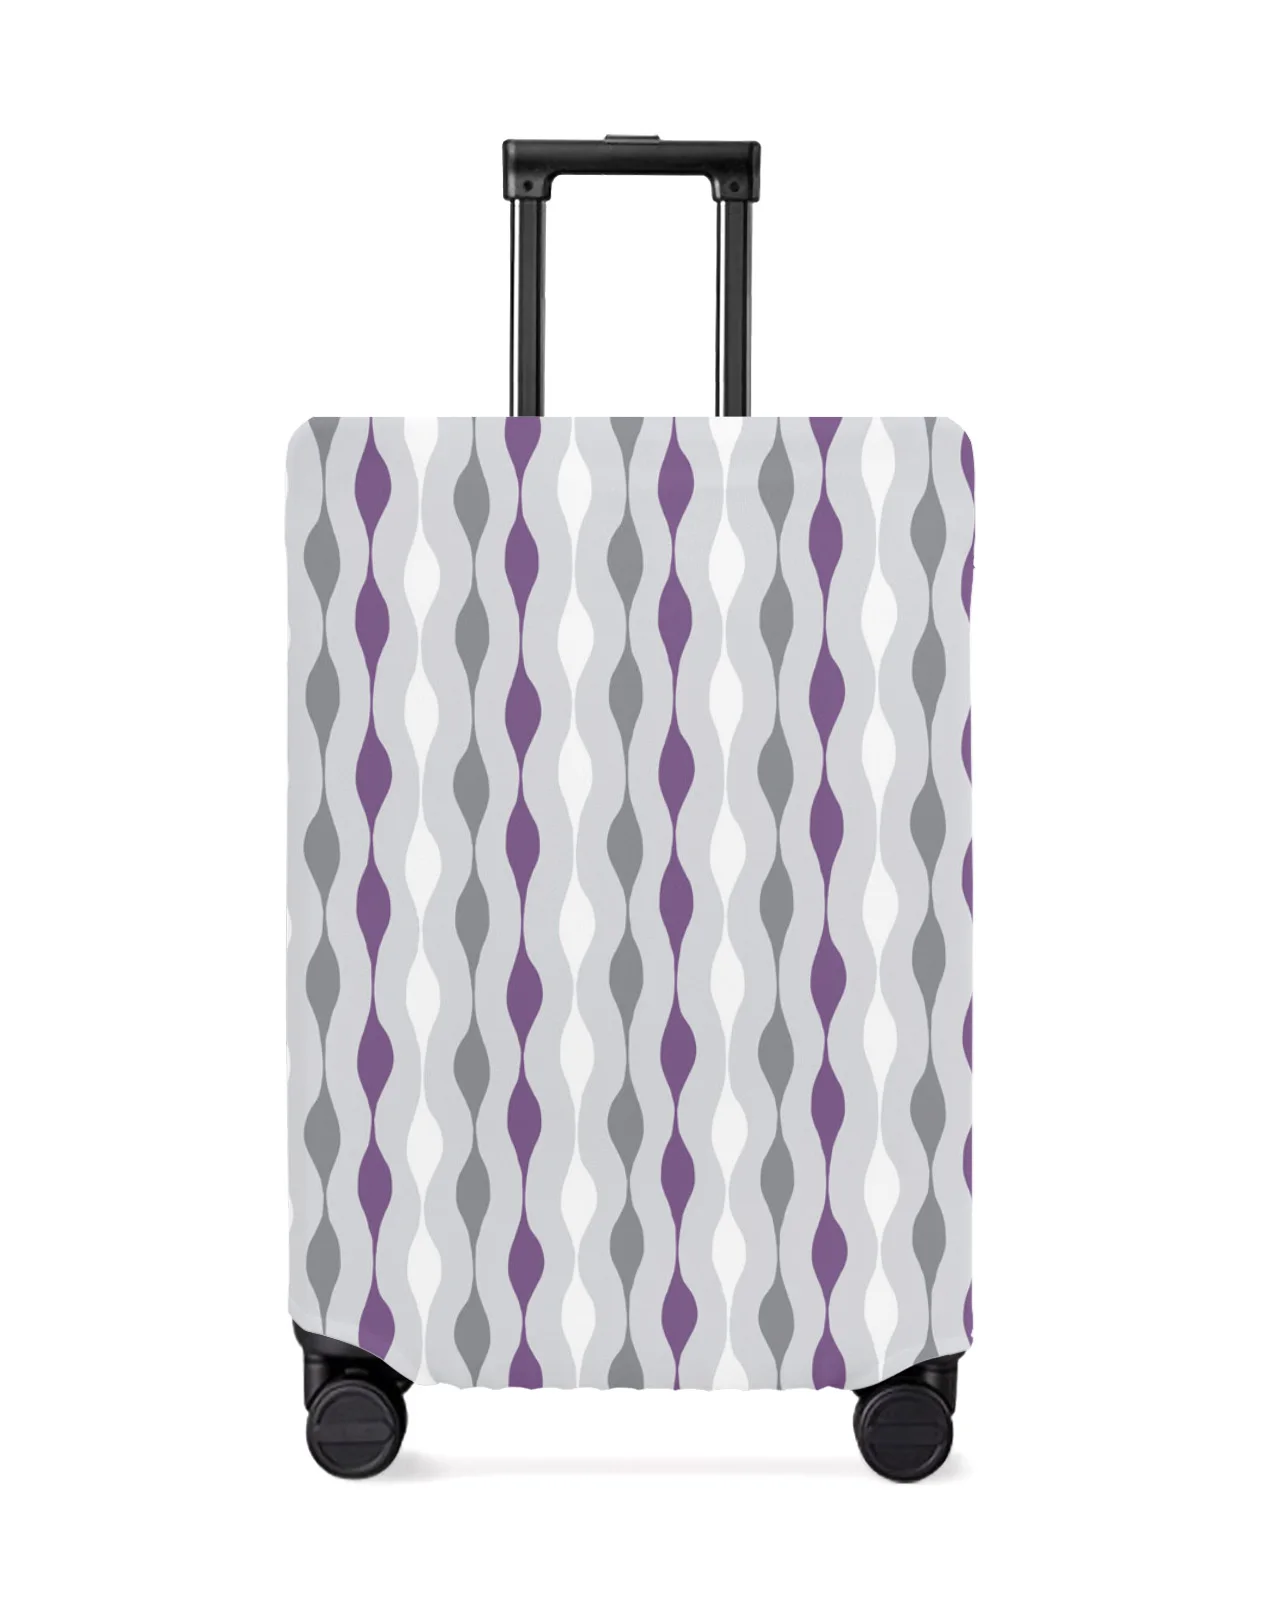 geometric-stripes-purple-gray-travel-luggage-protective-cover-for-travel-accessories-suitcase-elastic-dust-case-protect-sleeve